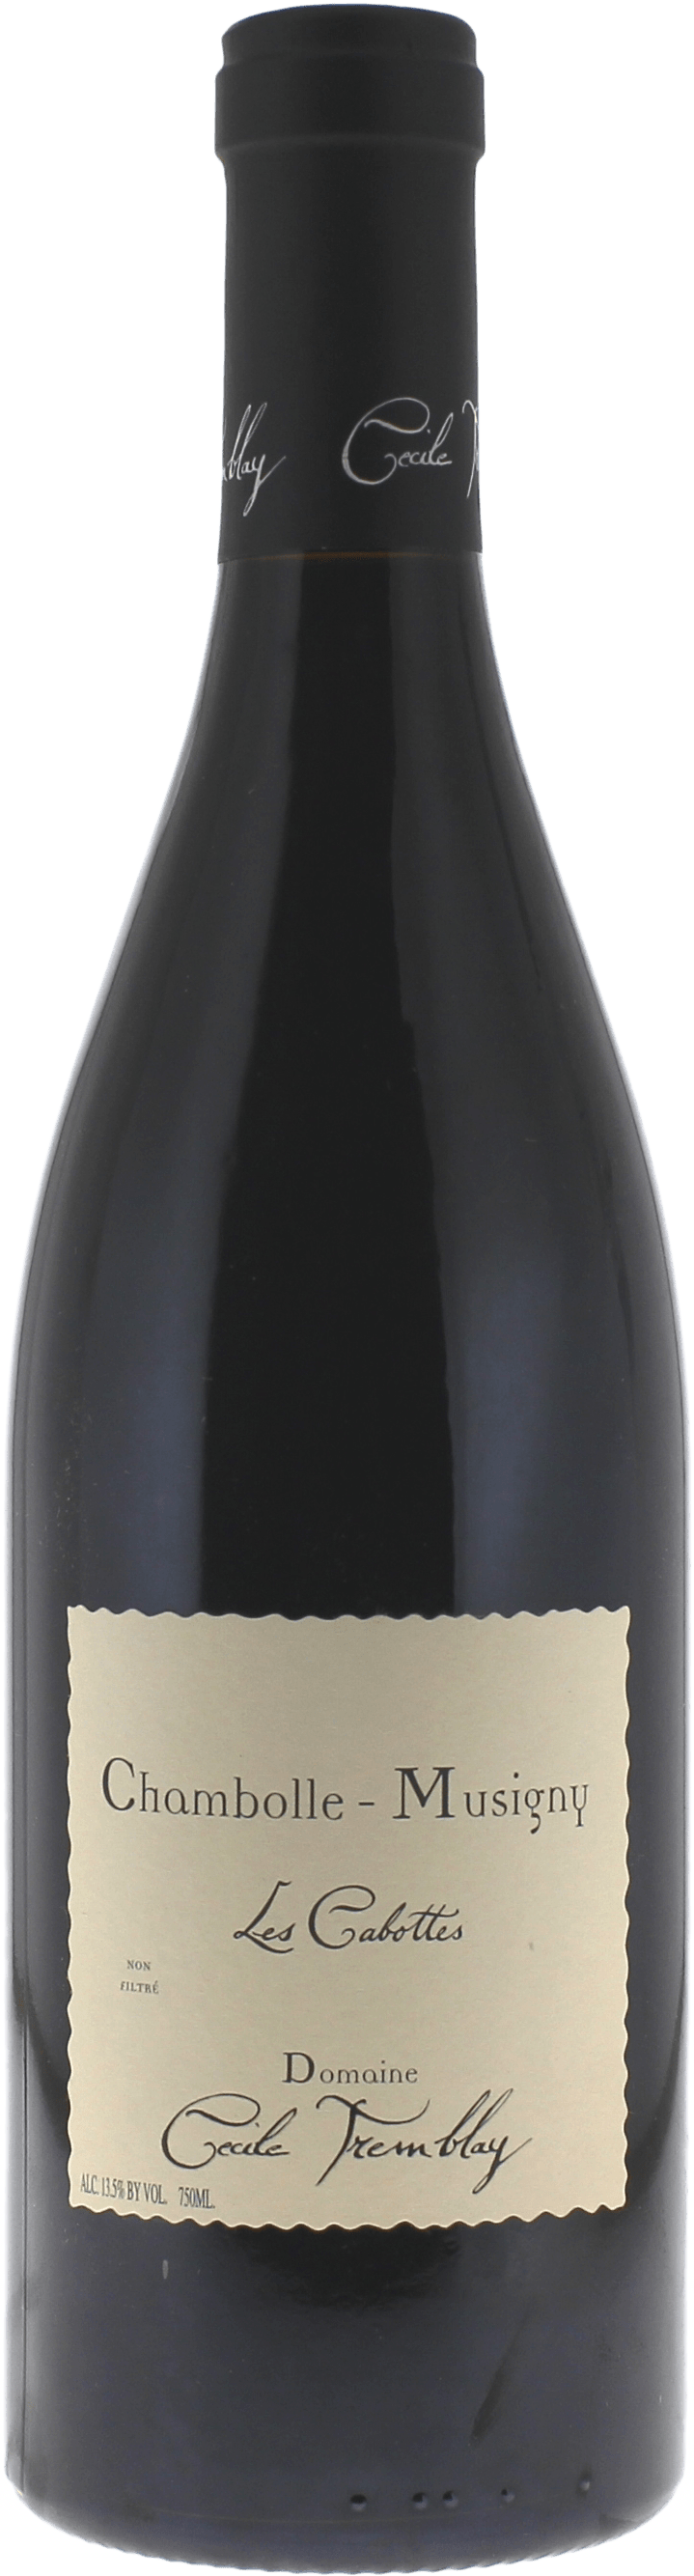 Chambolle musigny les cabottes 2020 Domaine TREMBLAY, Bourgogne rouge